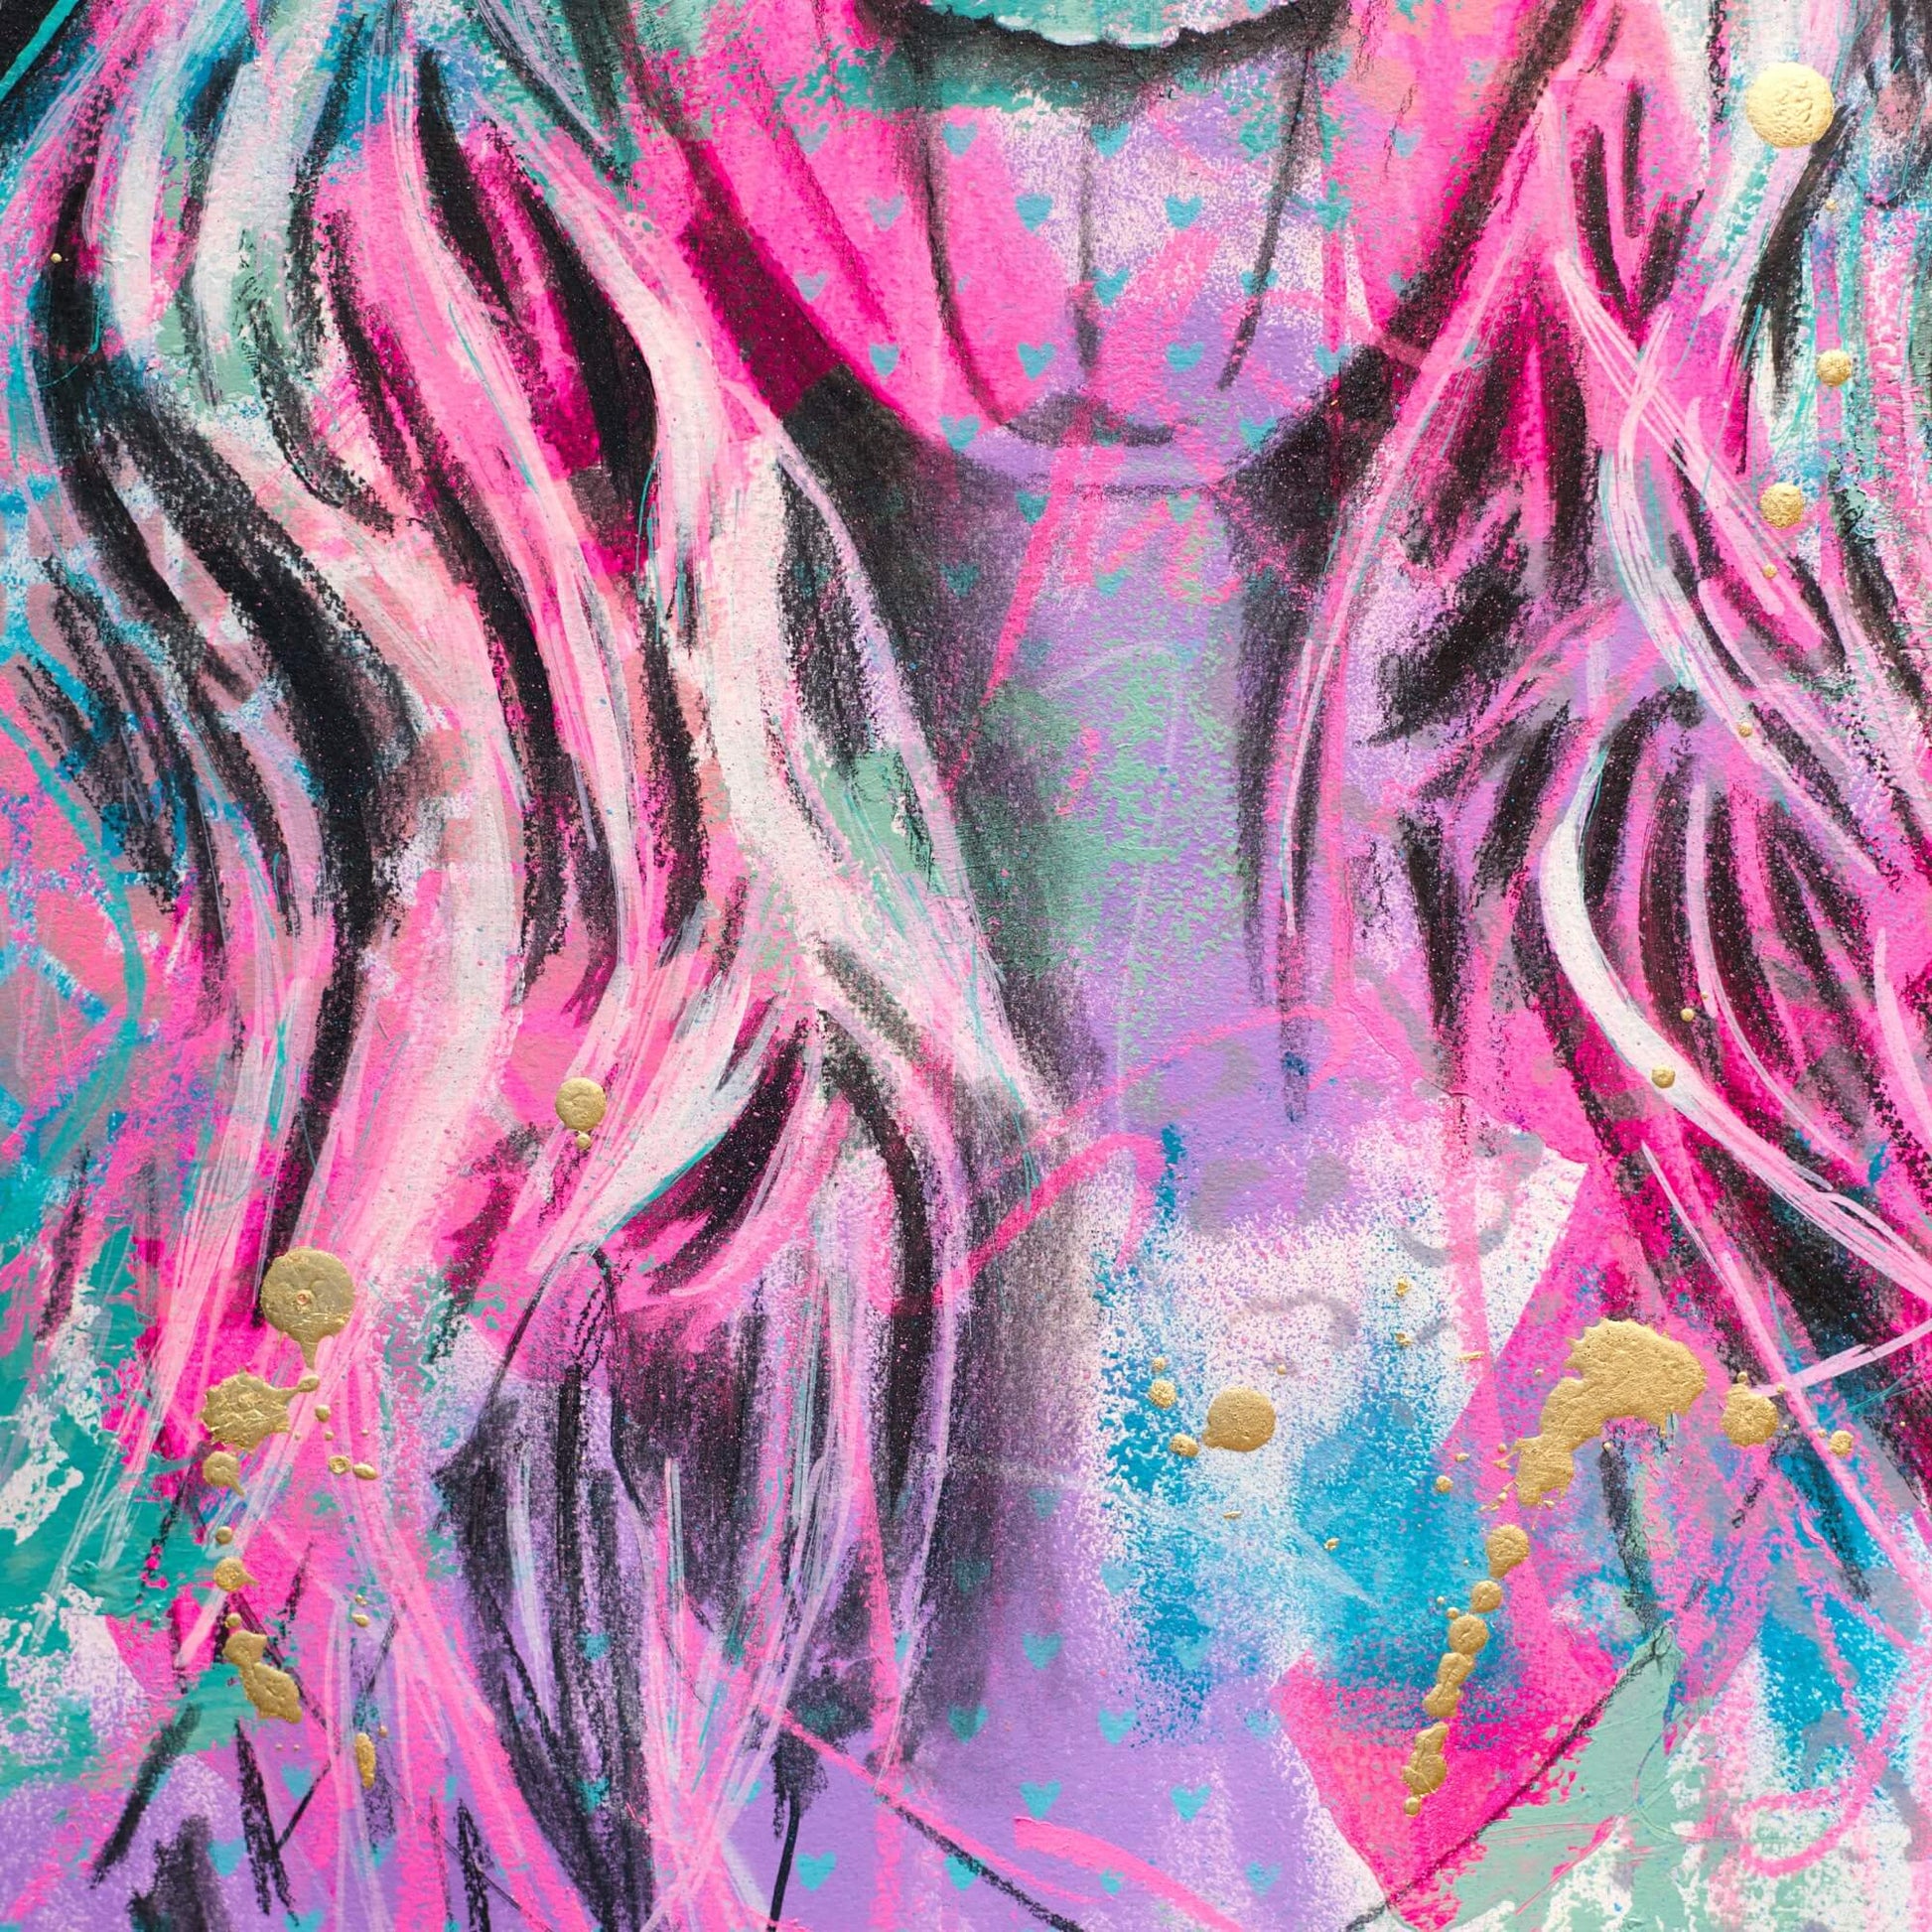 Abstract Art Painting Mixed Media Street Art Made in Melbourne Colourful Pink Woman Sticking her Tongue Out